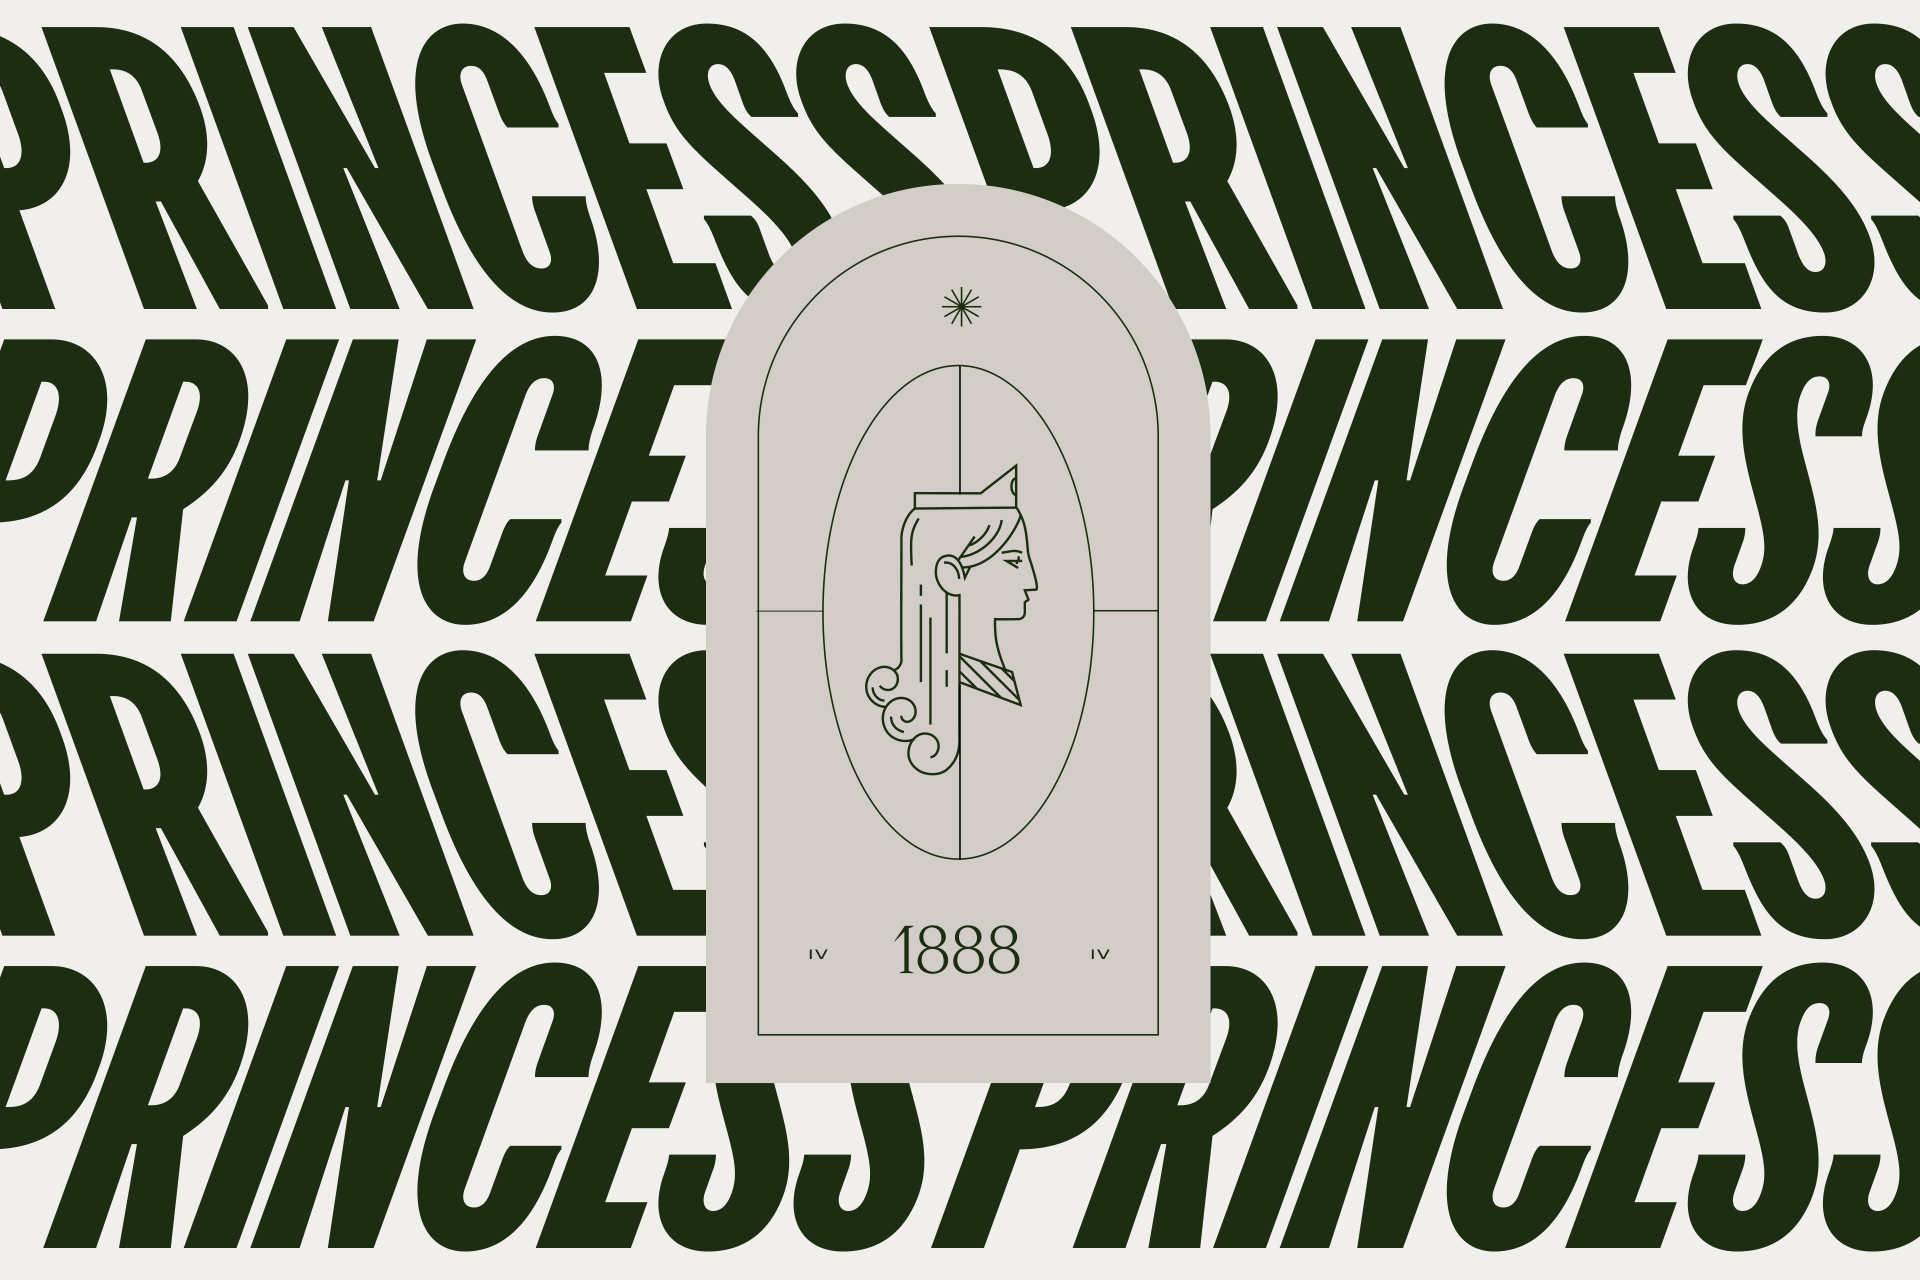 Illustration and typography form the Princess brand identity